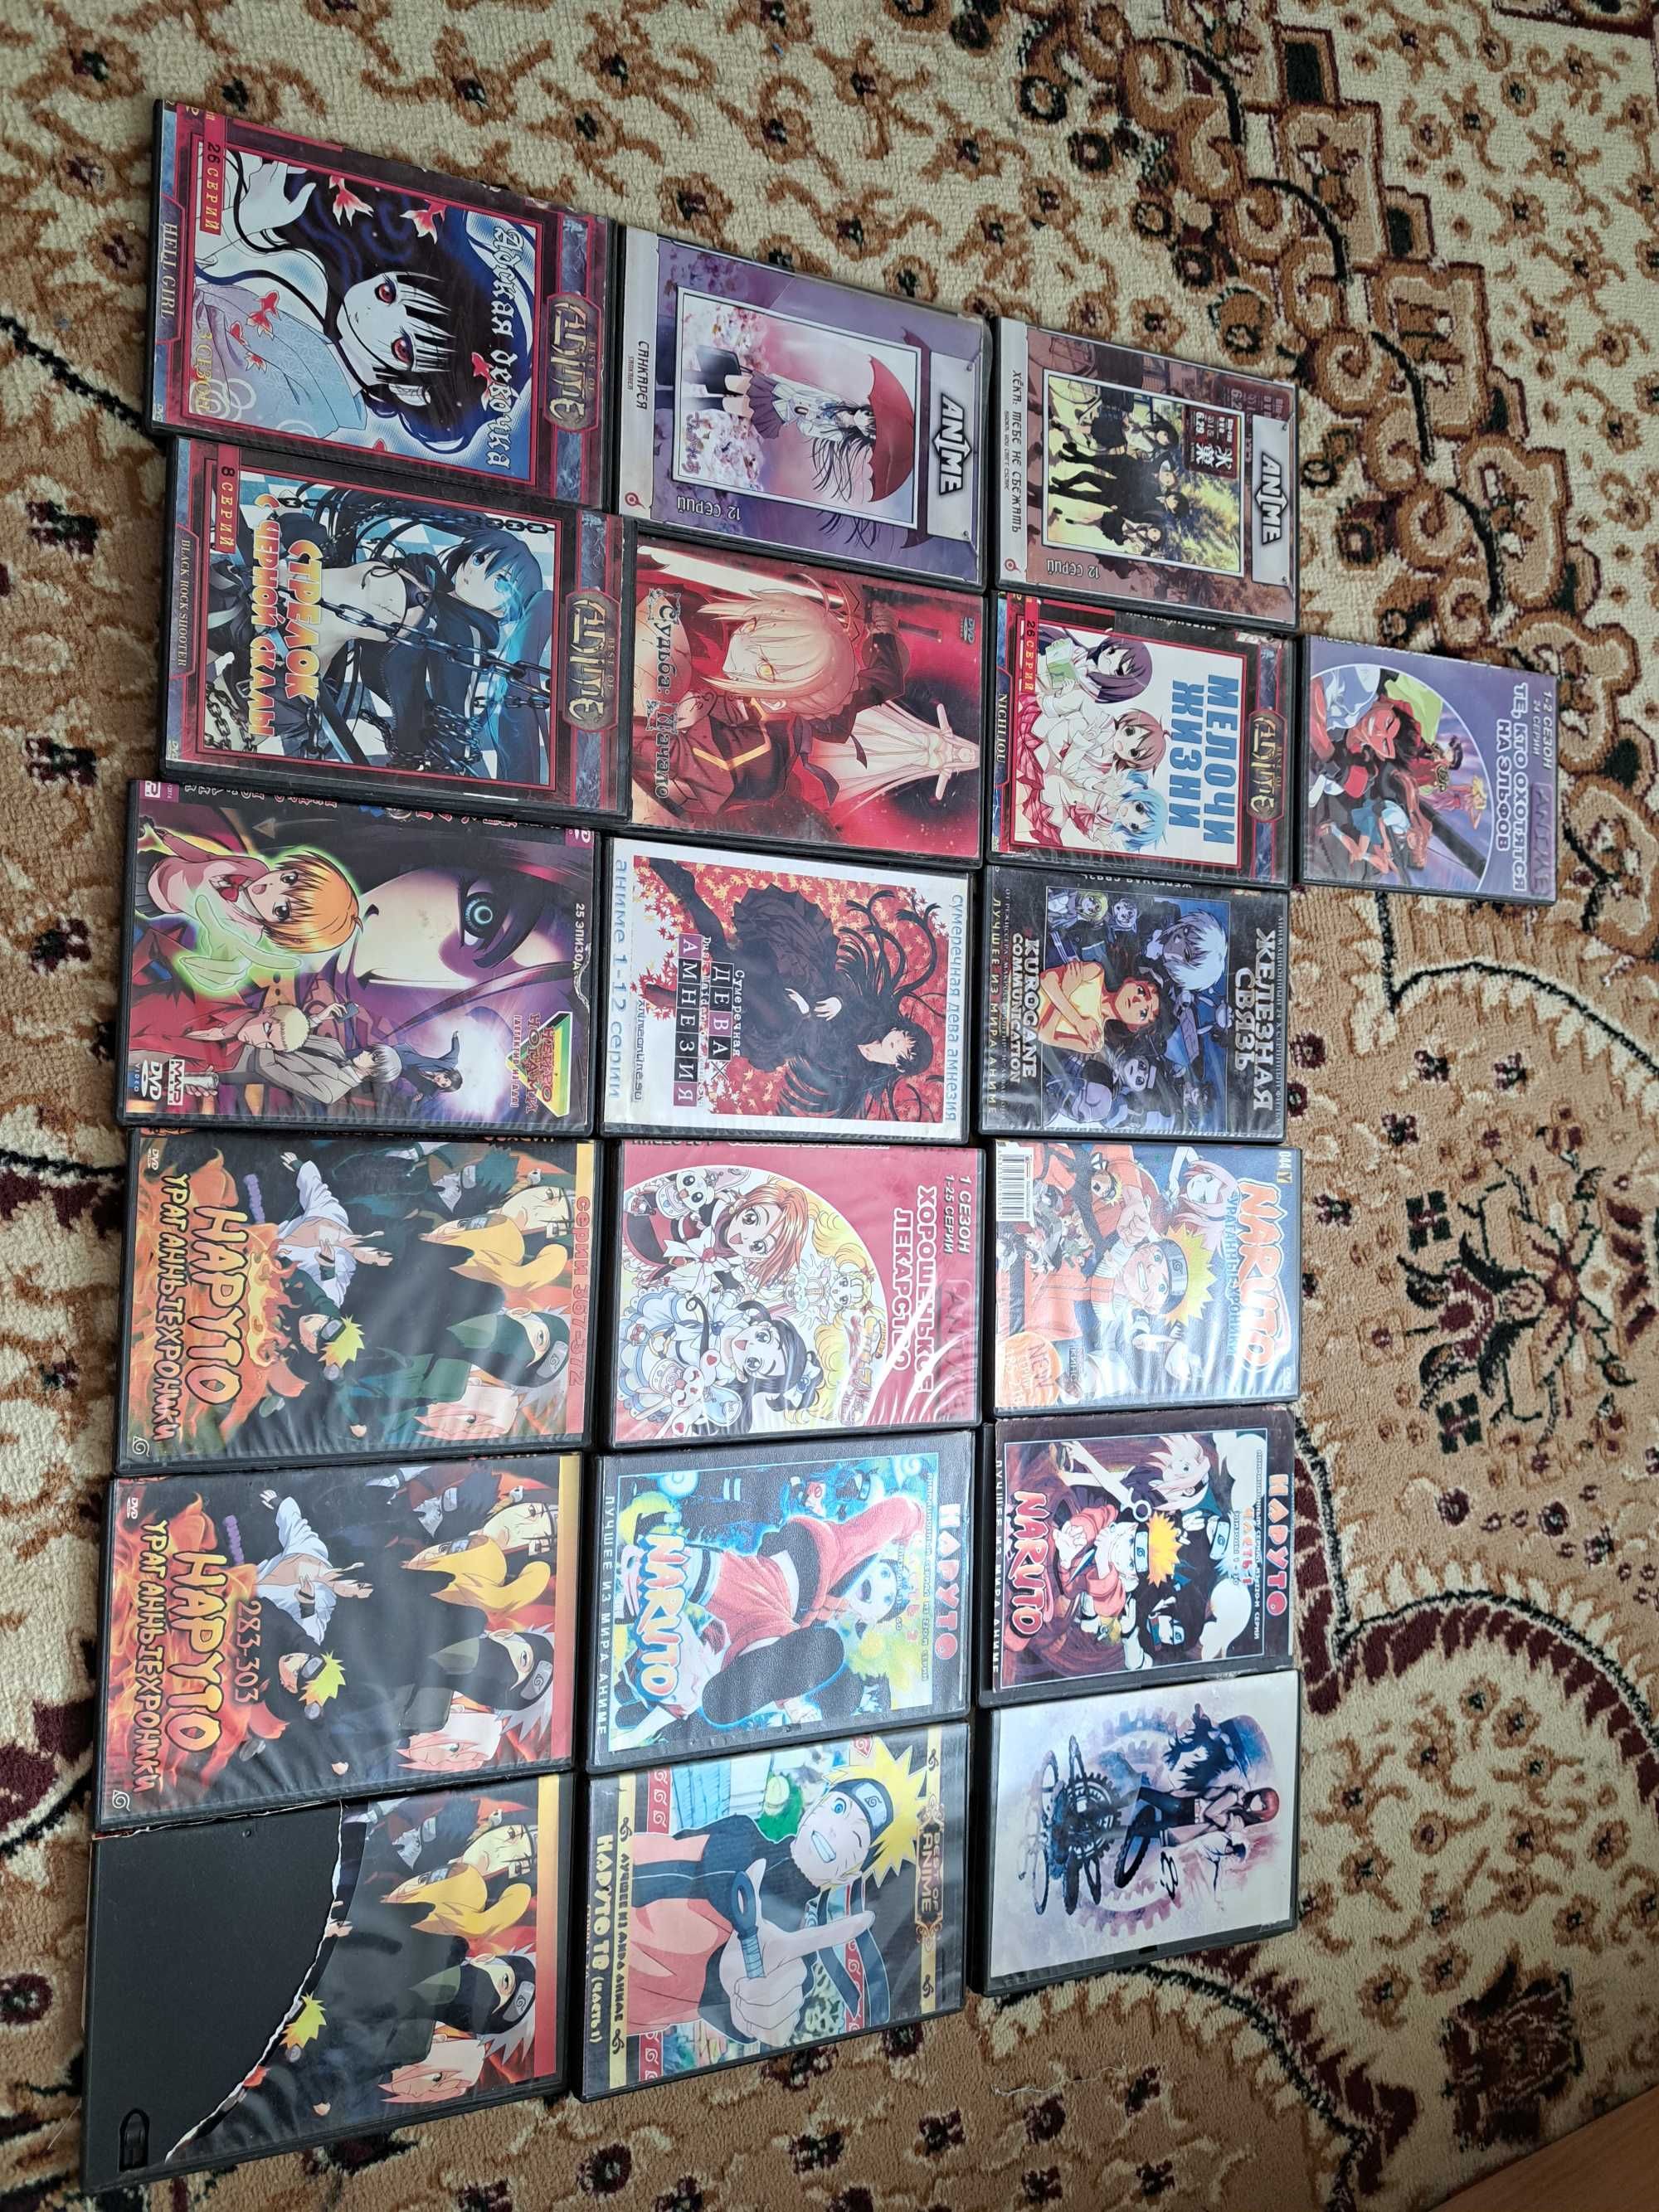 Anime disk, DVD disk, Naruto disk, Аниме диск, Двд Диск, Наруто диск,